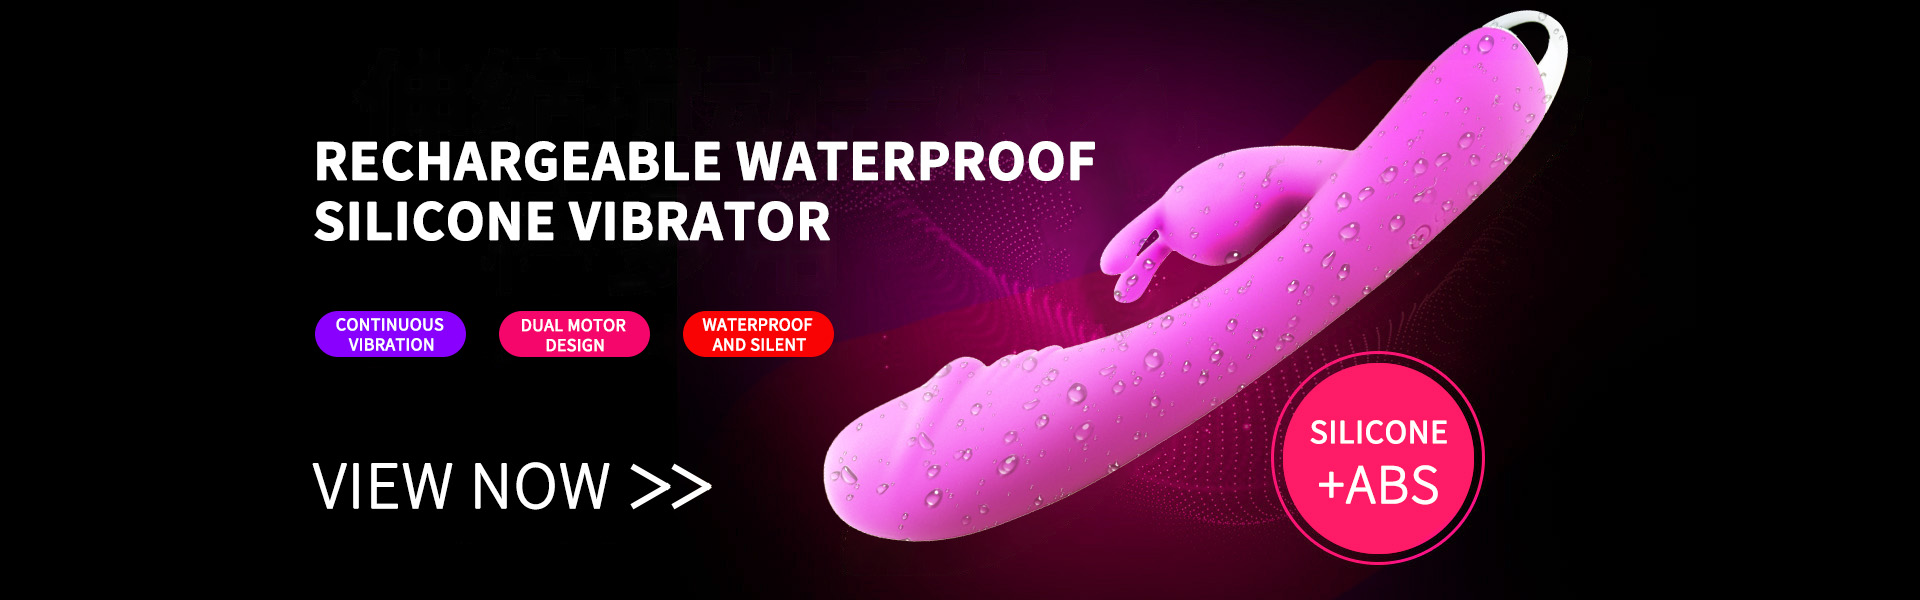 Rechargeable waterproof  silicone vibrator